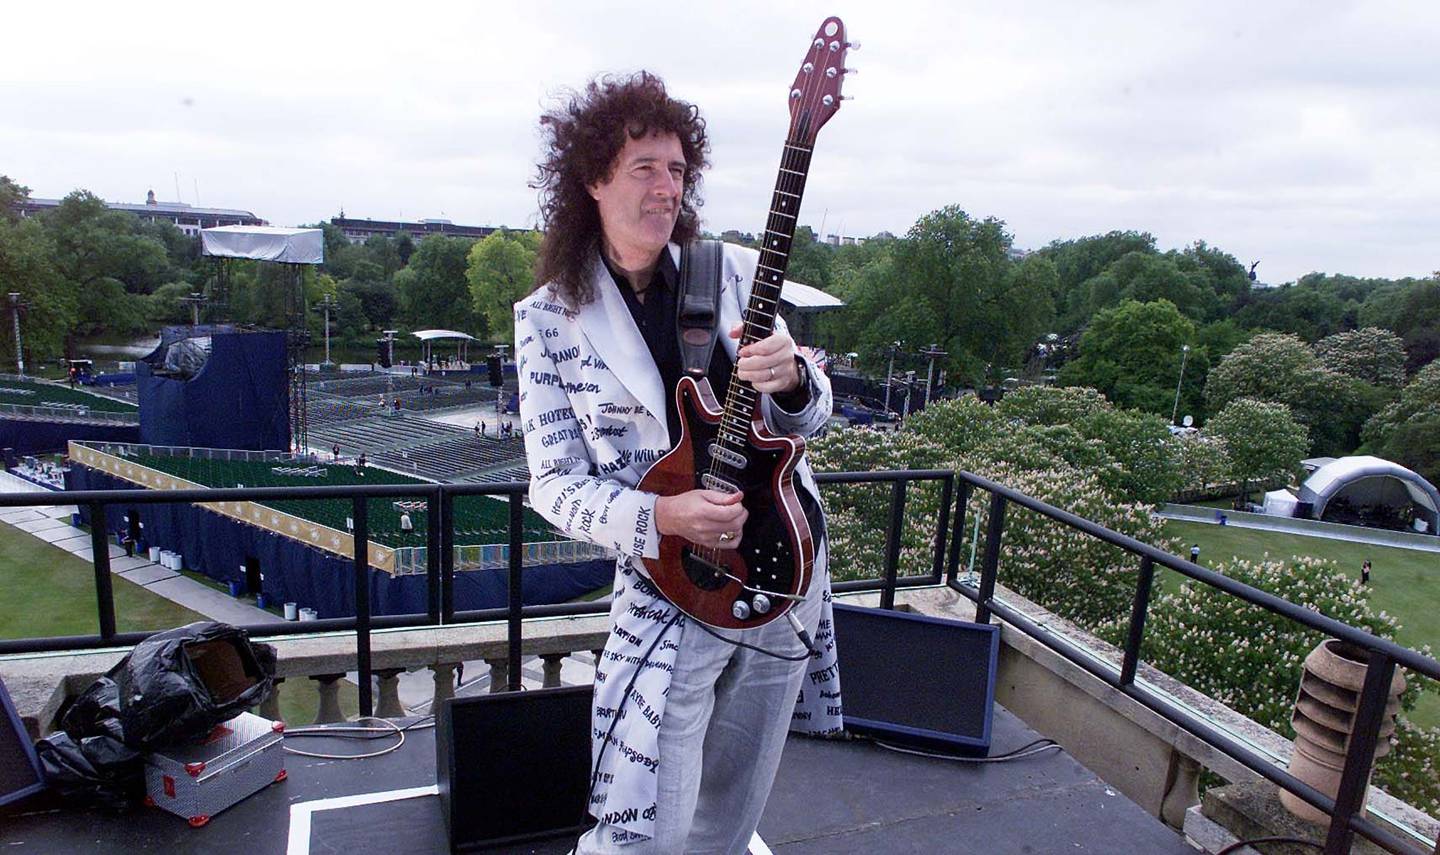 Queen's Brian May rehearsing on the roof of Buckingham Palace ahead of his performance of the national anthem, for Queen Elizabeth II's golden jubilee concert in 2002. PA Wire